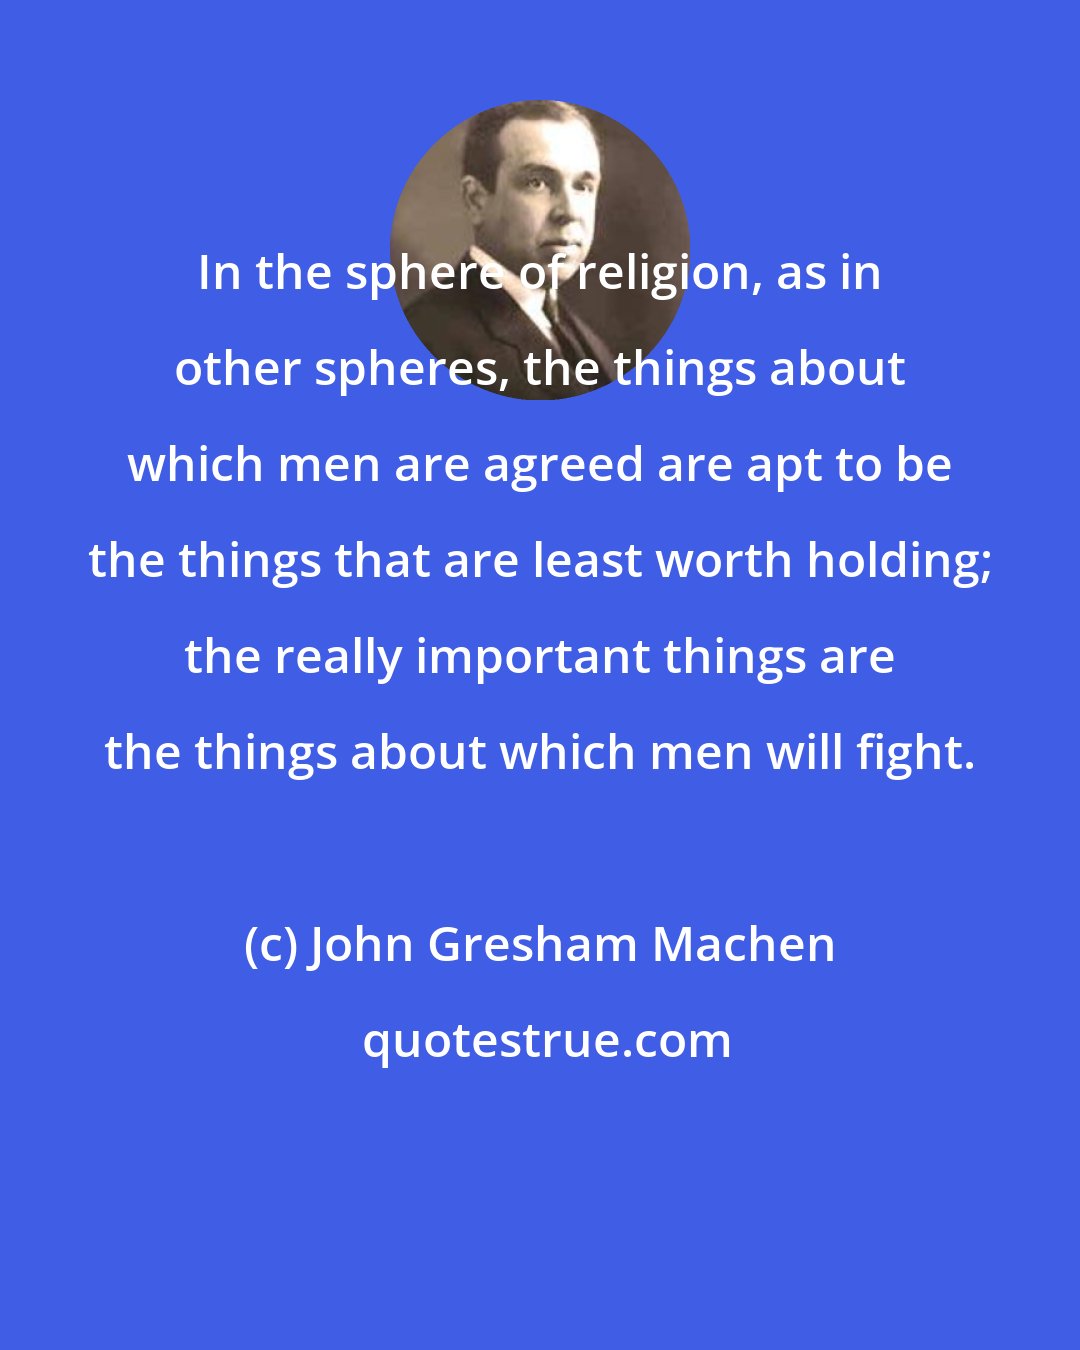 John Gresham Machen: In the sphere of religion, as in other spheres, the things about which men are agreed are apt to be the things that are least worth holding; the really important things are the things about which men will fight.